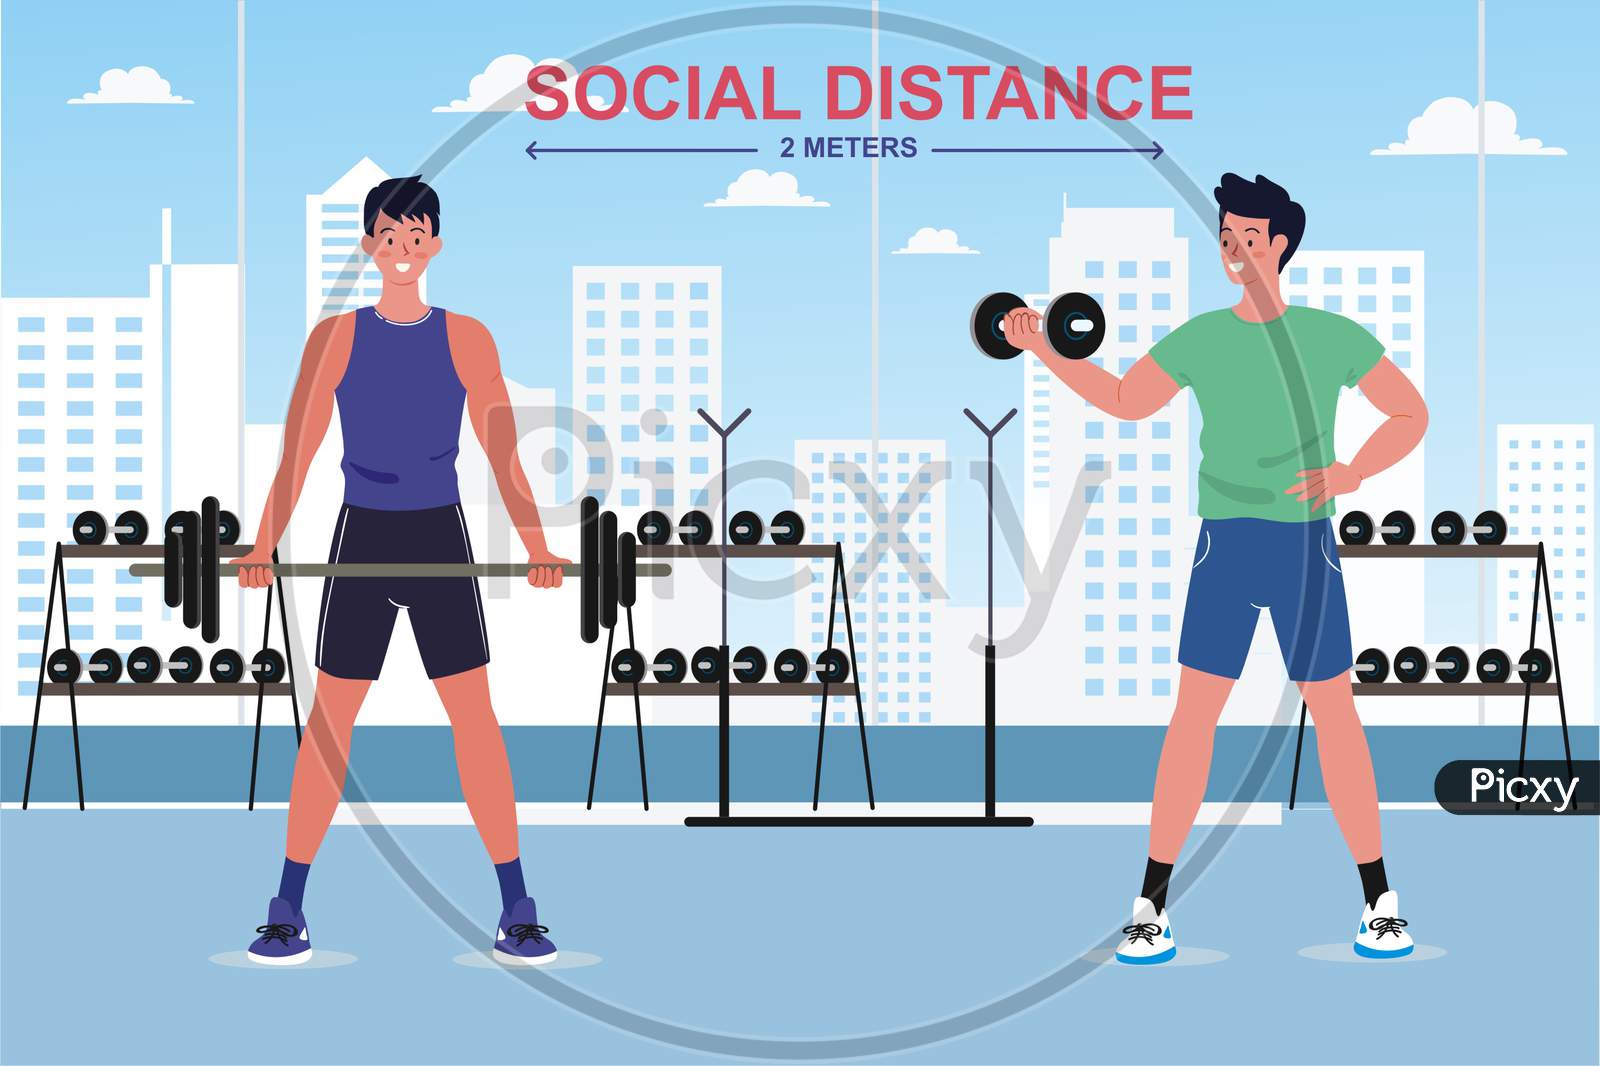 New normal social distancing Fitness center lifestyle after pandemic COVID-19 coronavirus.